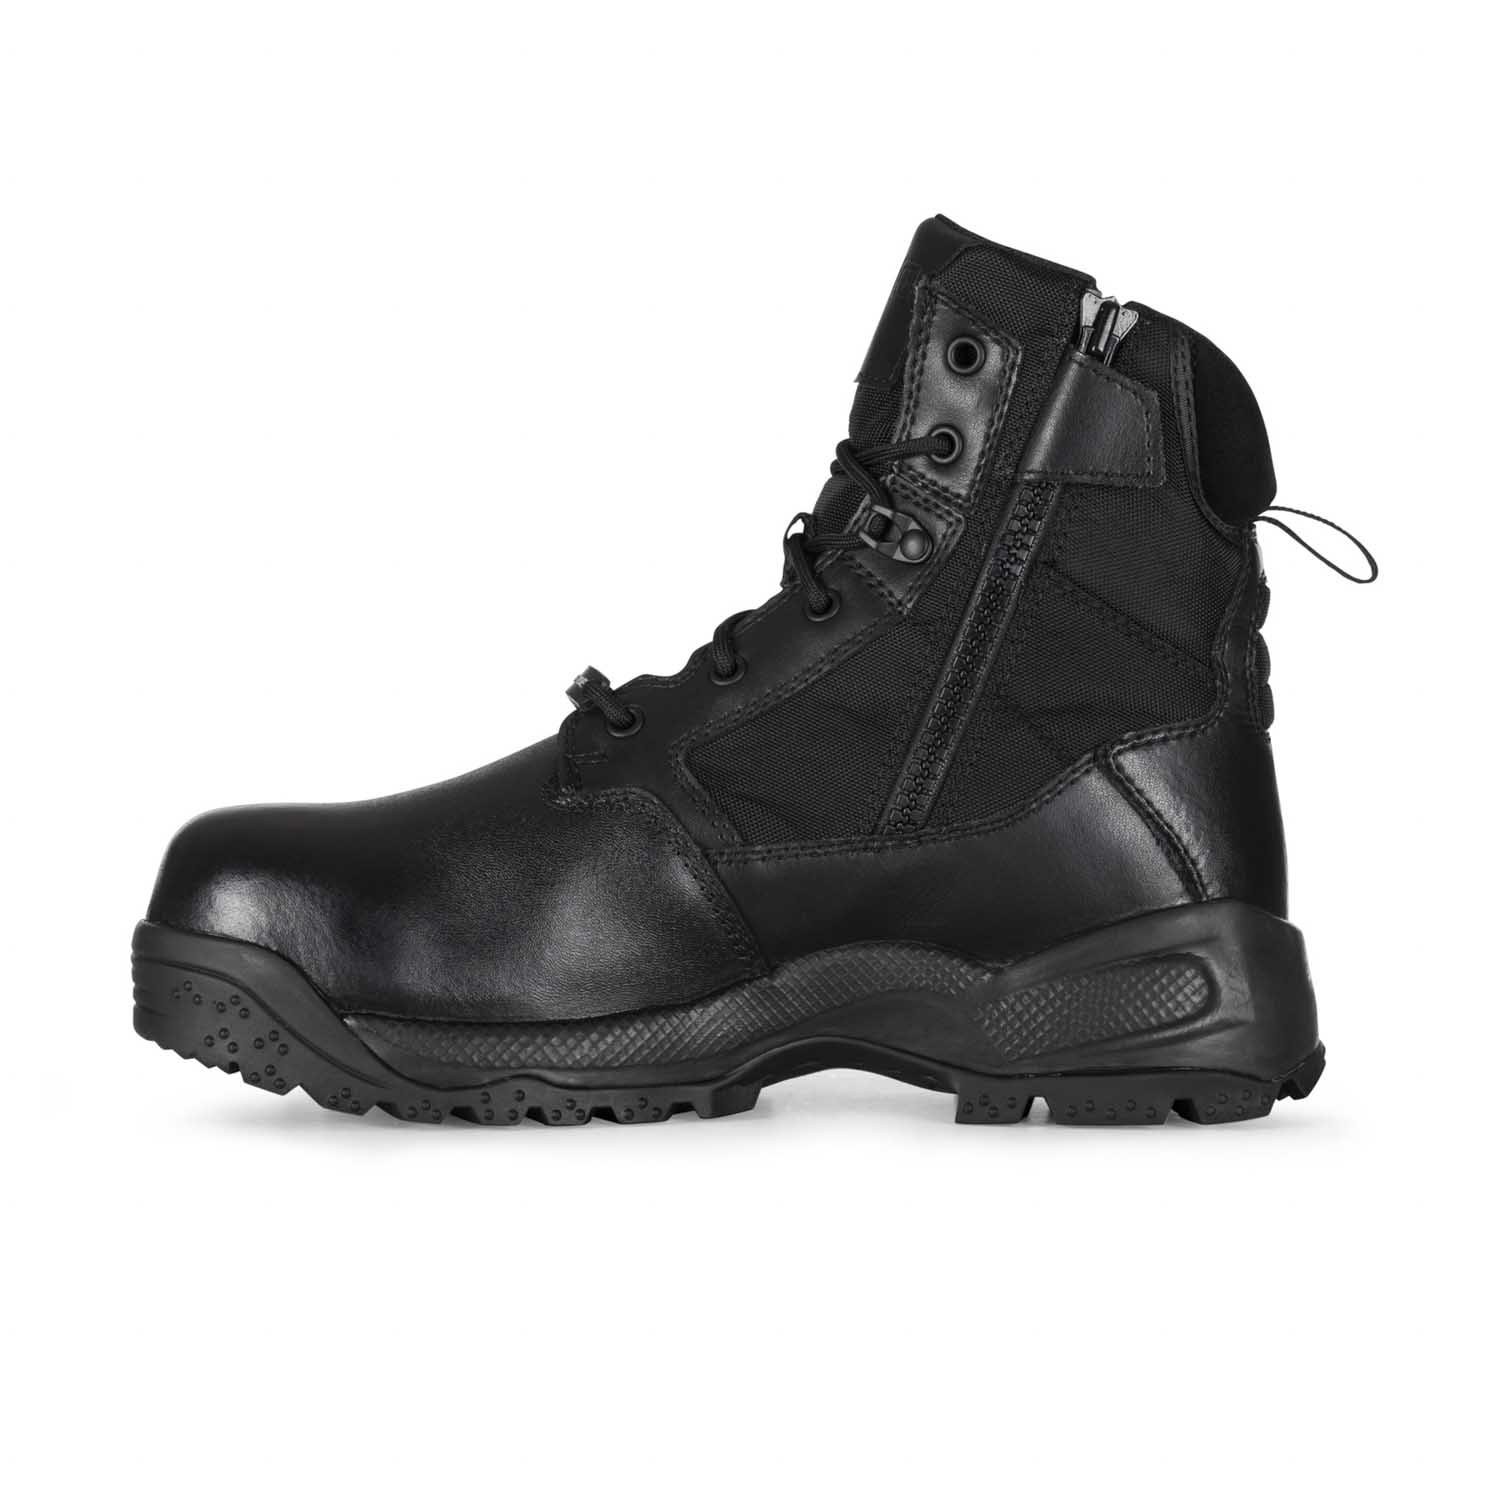 5.11 A.T.A.C. 2.0 6" Shield Side Zip Boots